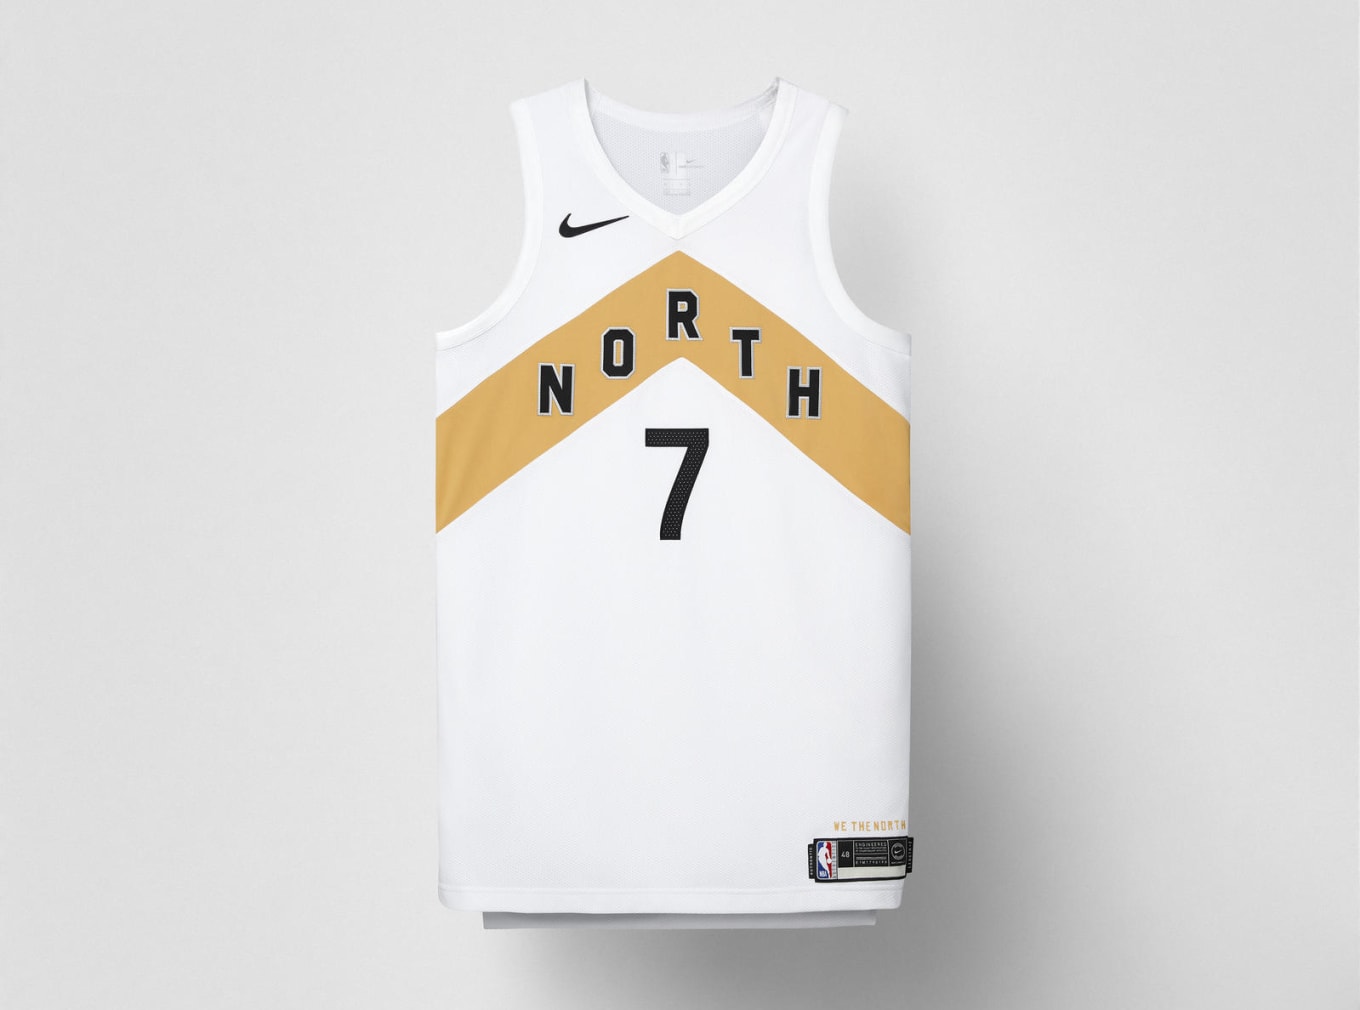 we the north jerseys